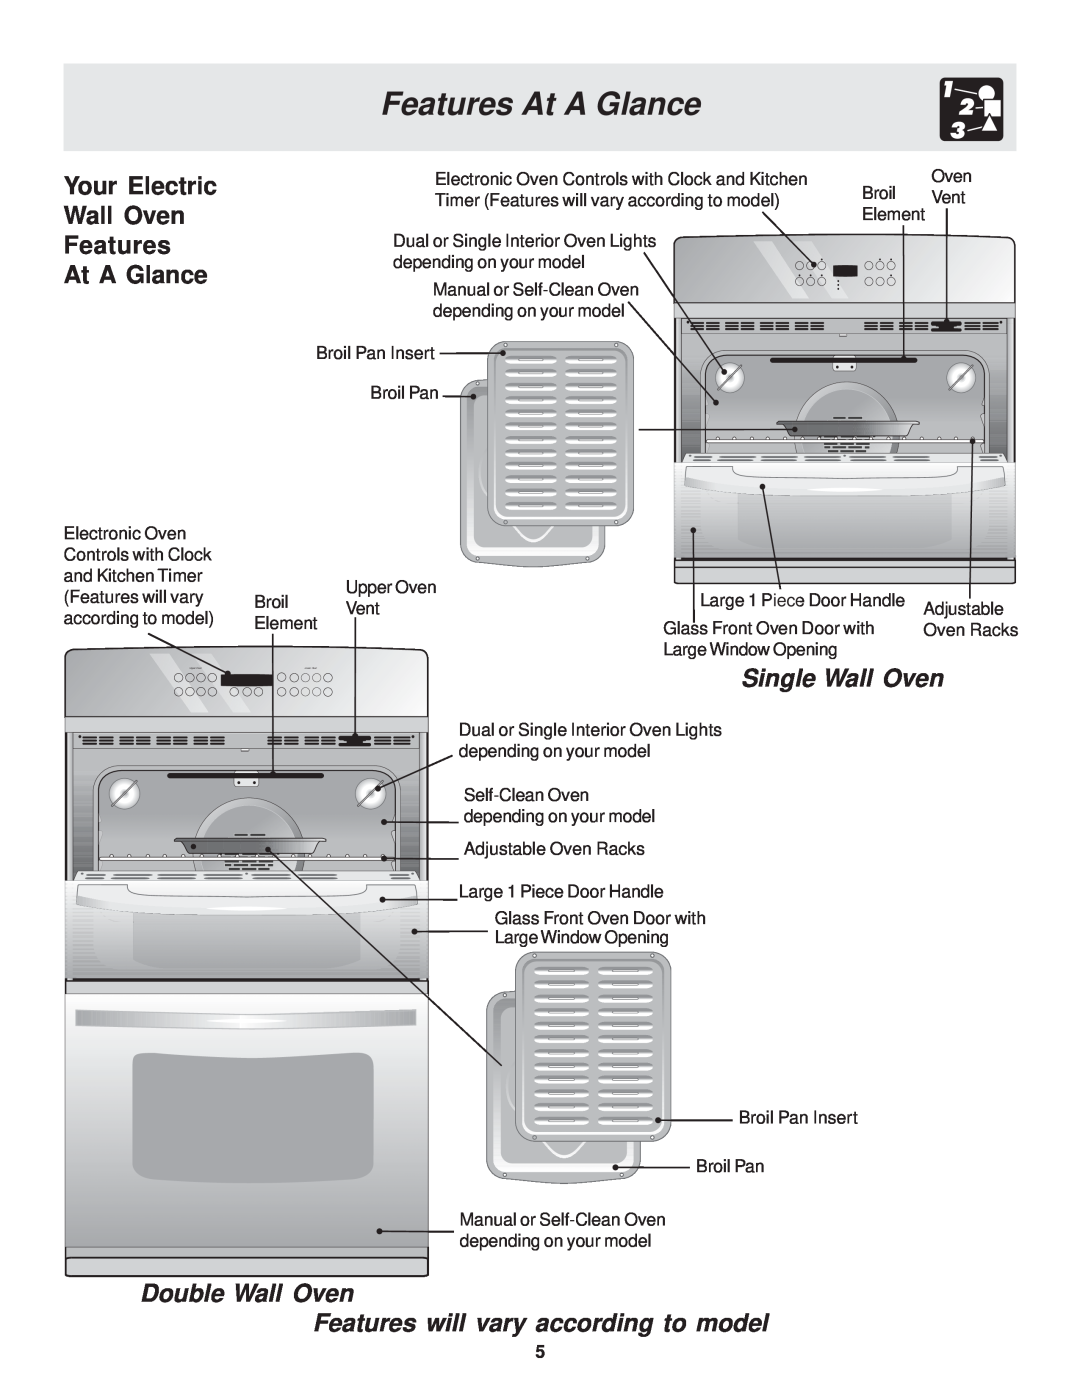 Frigidaire 318200929 Features At A Glance, Double Wall Oven Features will vary according to model, Single Wall Oven 